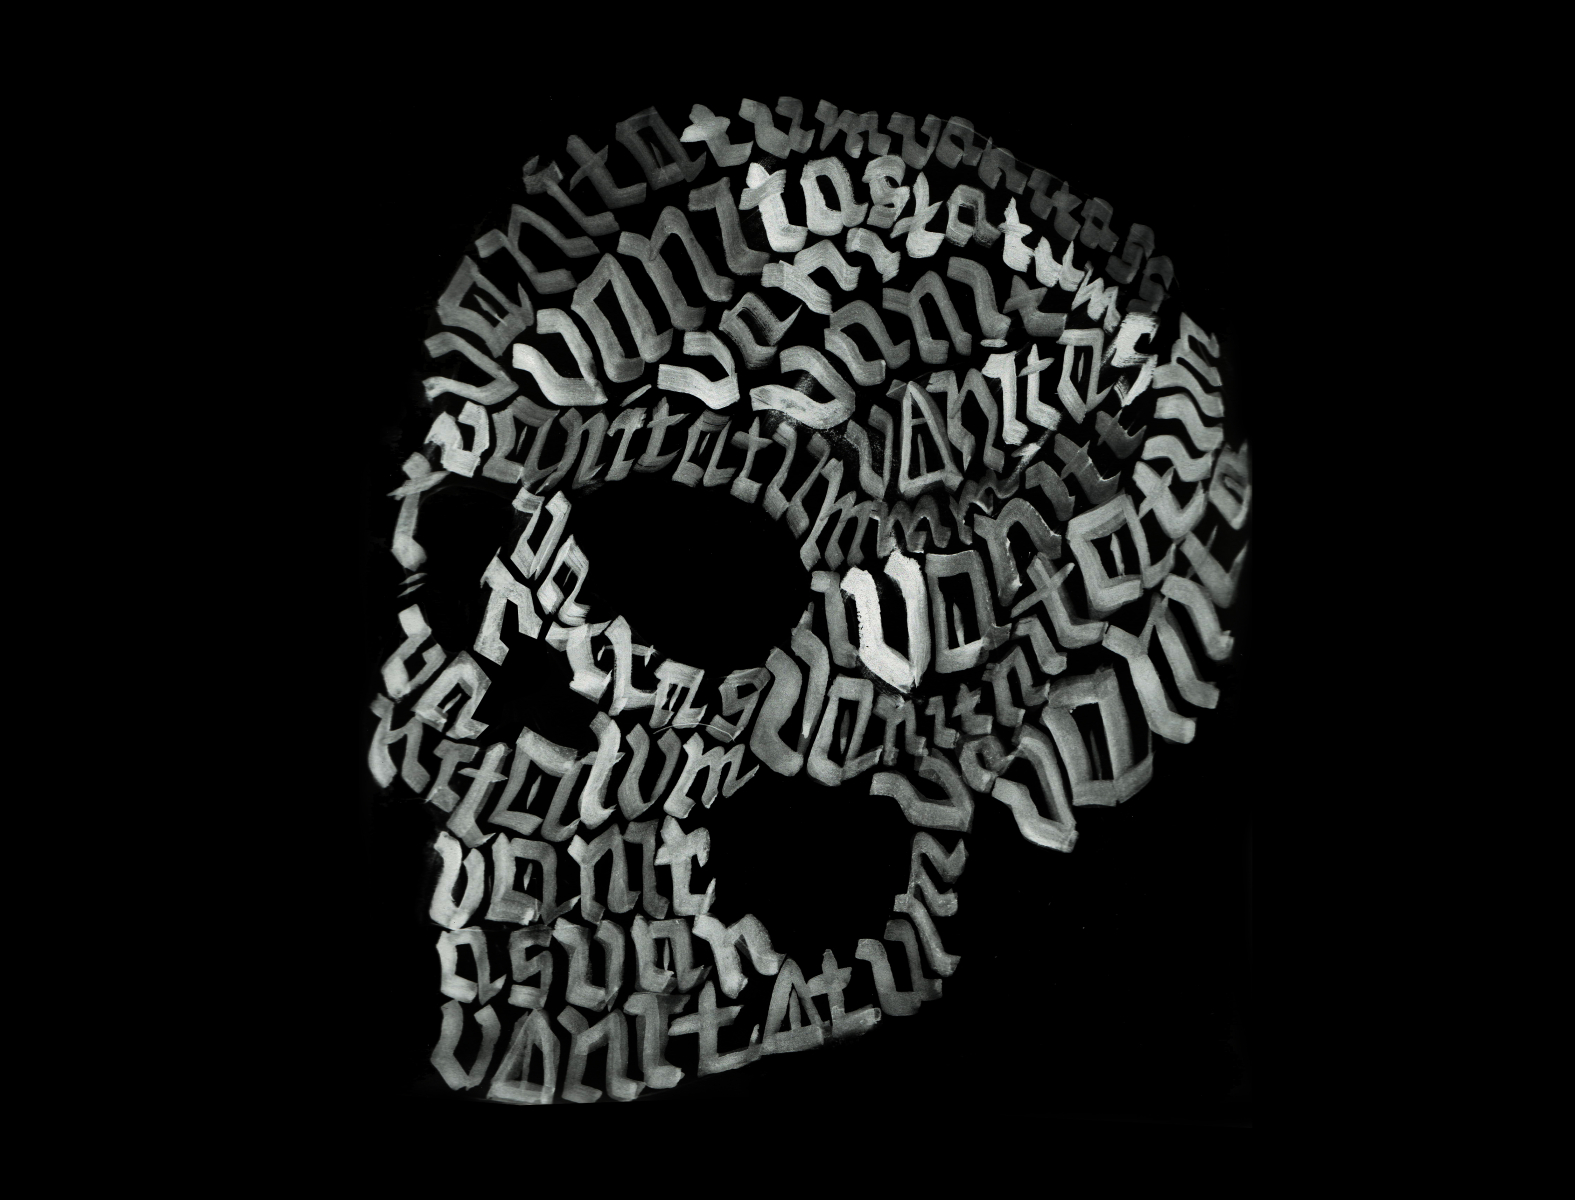 Calligraphy in Latin in the shape of a skull by Nikolay Scherevsky on ...